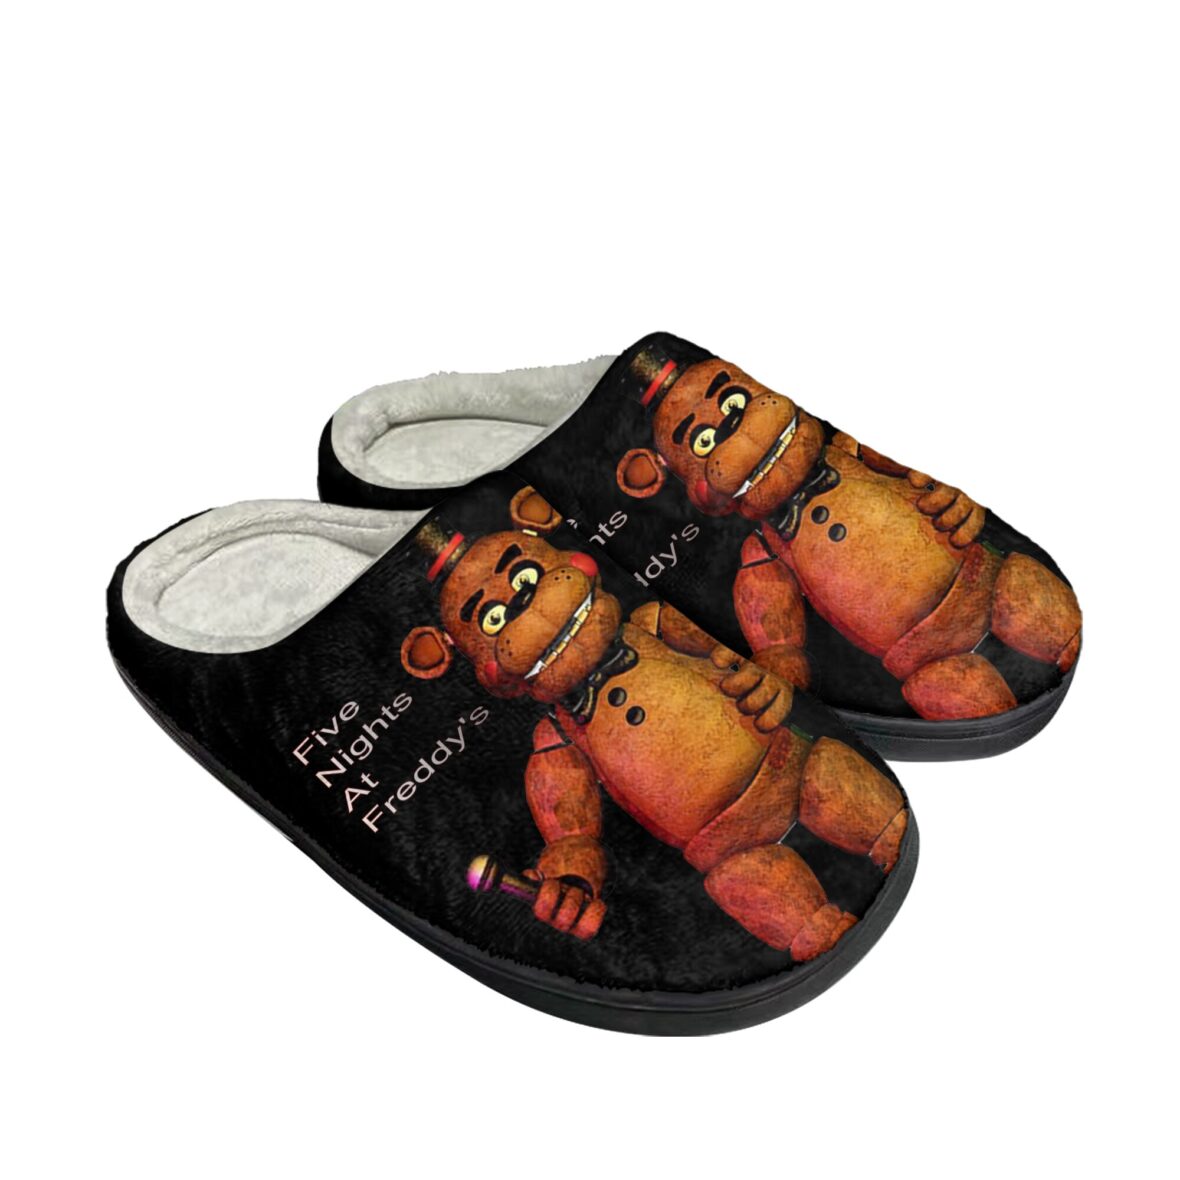 Anime Fnaf Five Nights At Freddy’s Plush Slippers